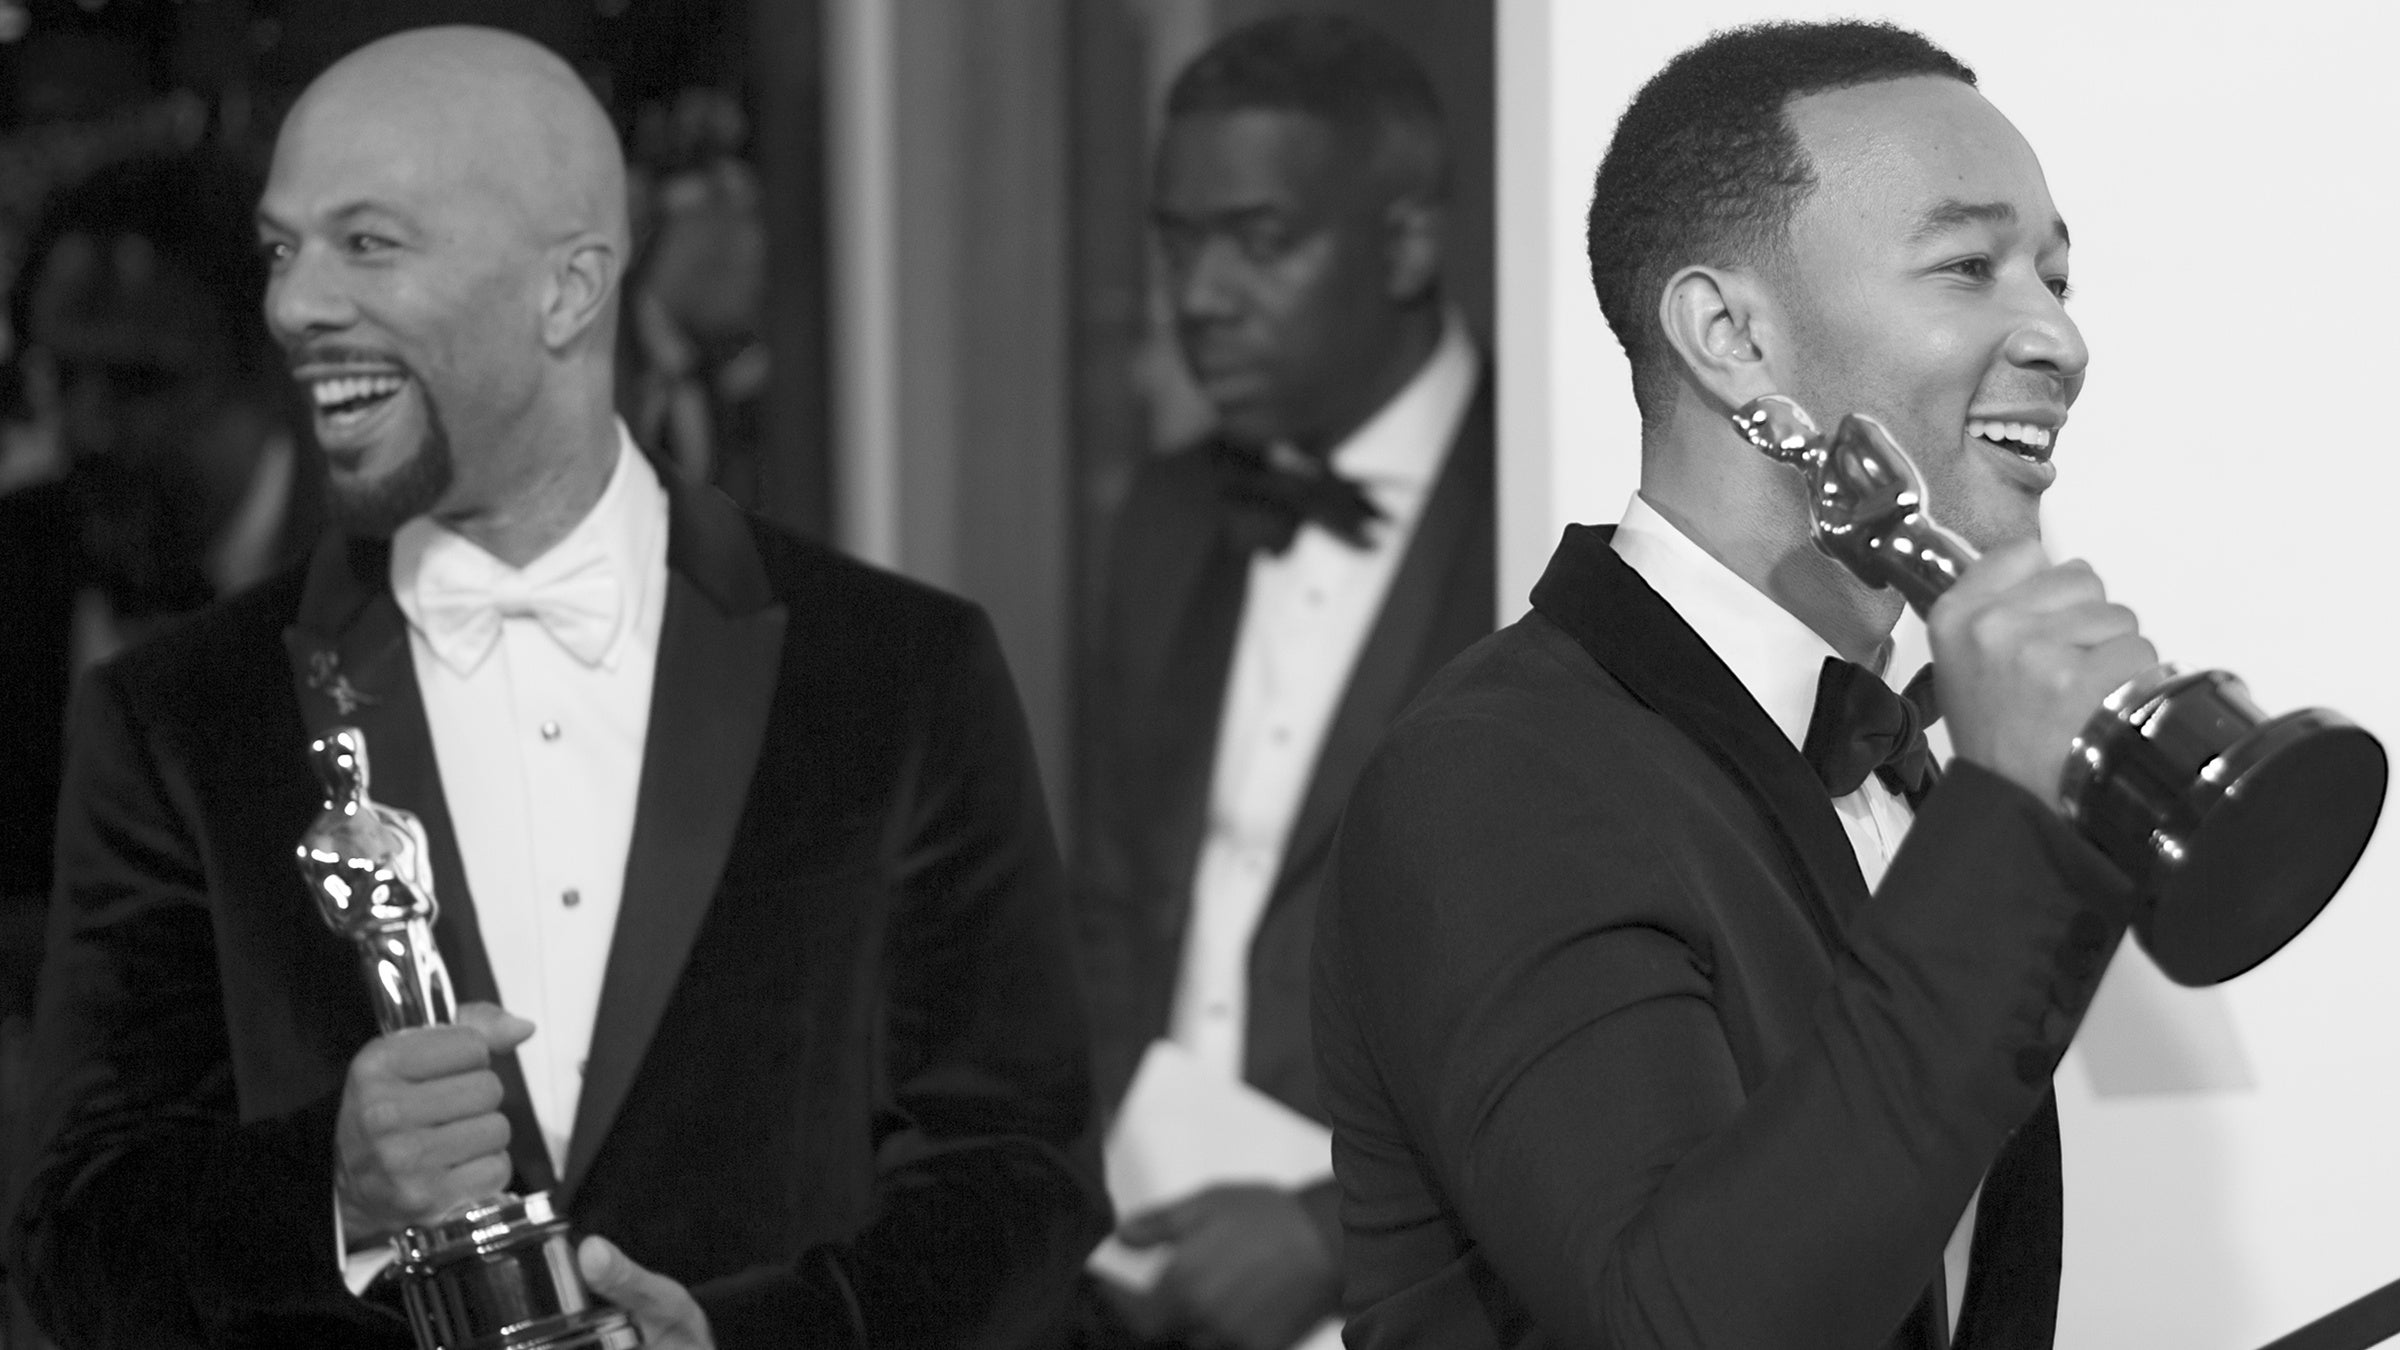 John Legend And Common Reunite For A Timely Performance Of ‘Glory’